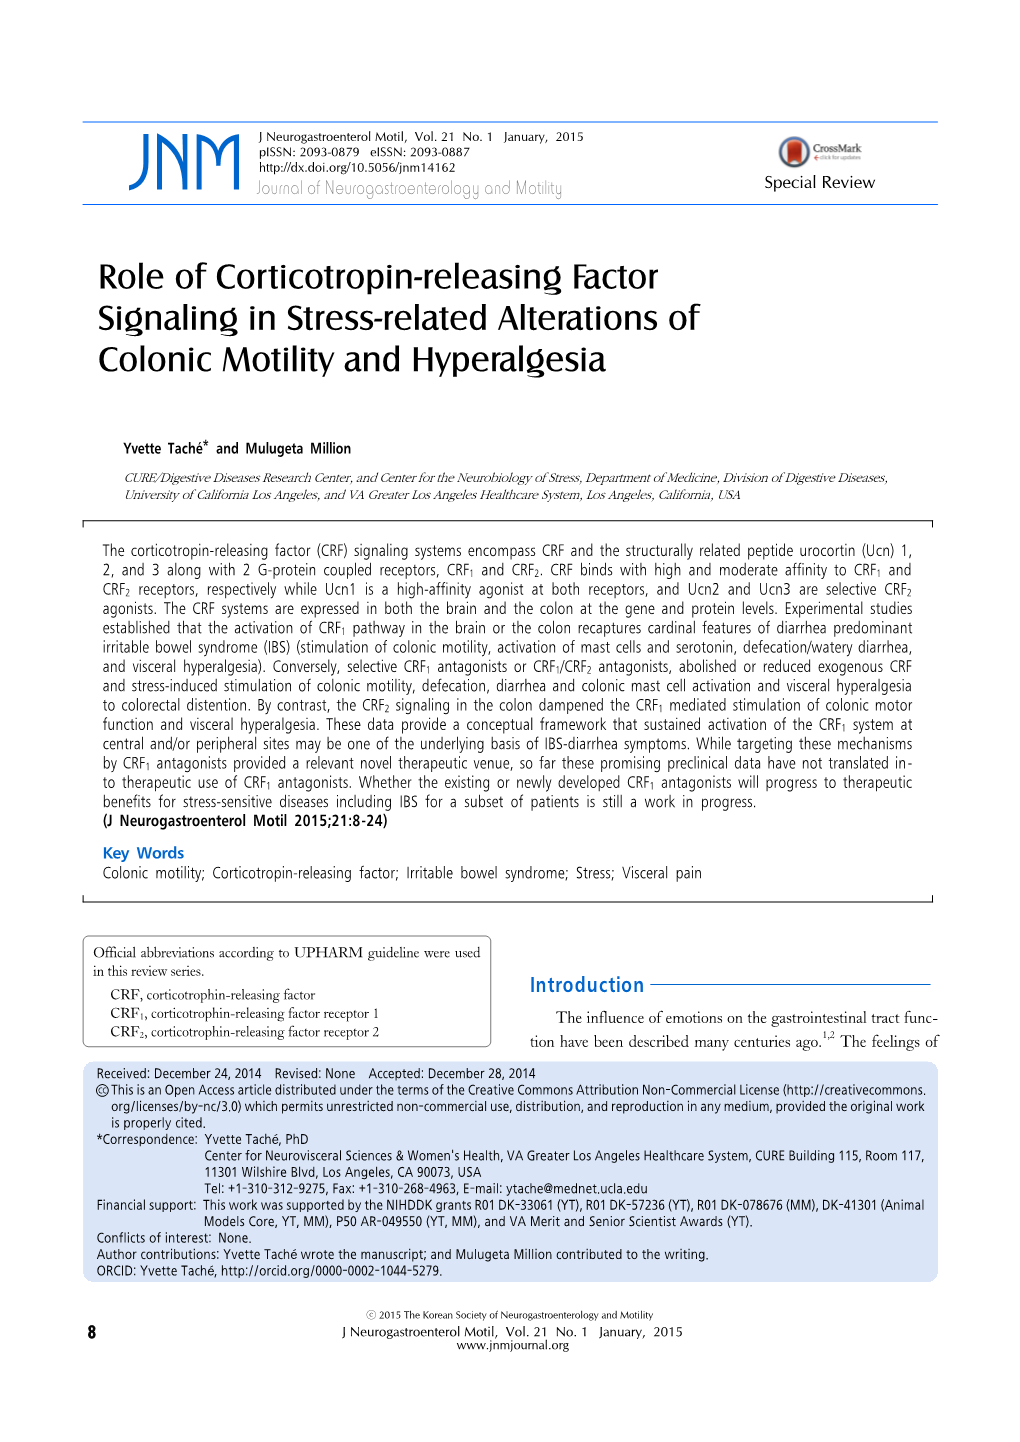 Role of Corticotropin-Releasing Factor Signaling in Stress-Related Alterations of Colonic Motility and Hyperalgesia